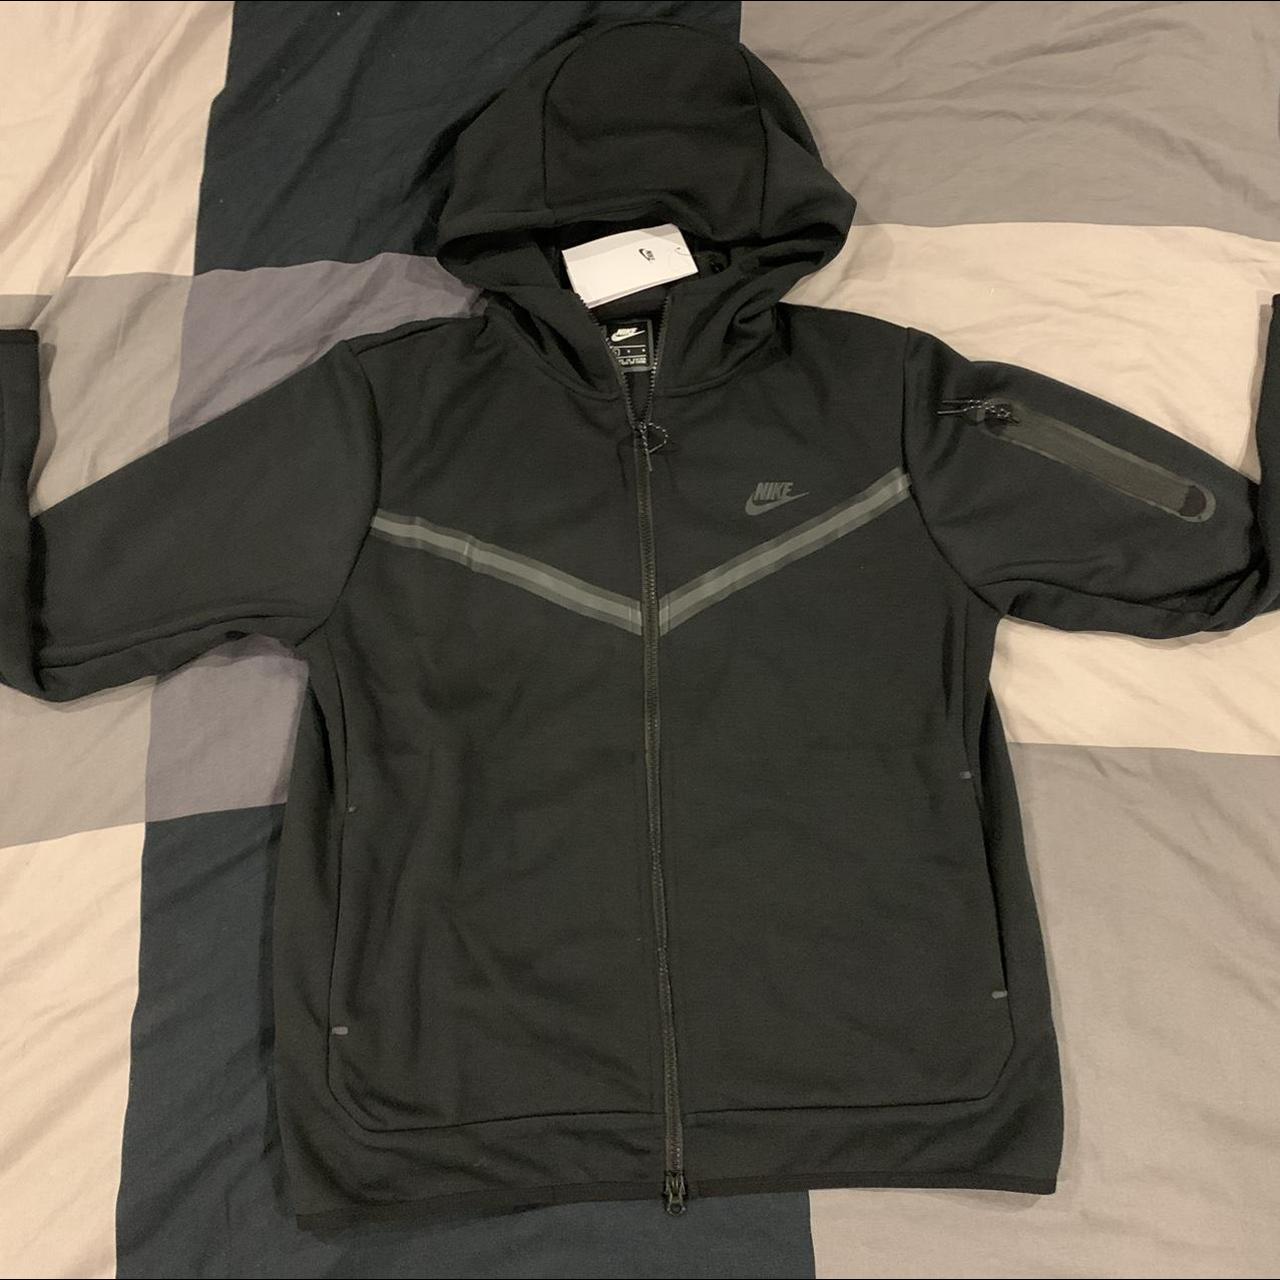 NIKE TECH BRAND NEW WITH TAGS Open to offers - Depop